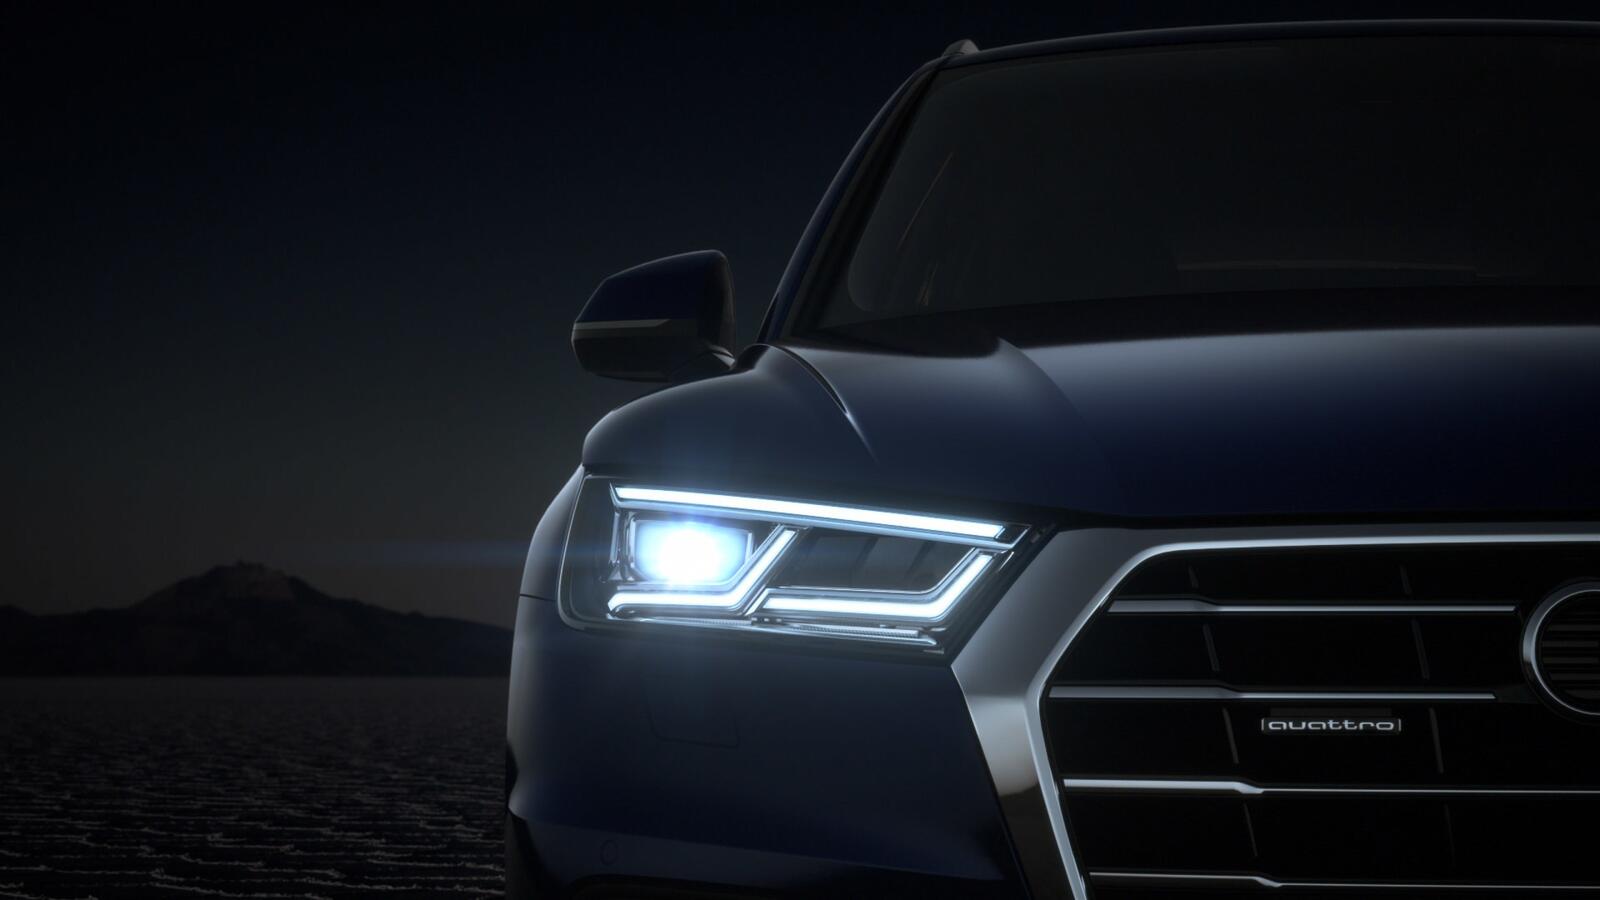 Wallpapers audi a4 quattro cars headlights on the desktop